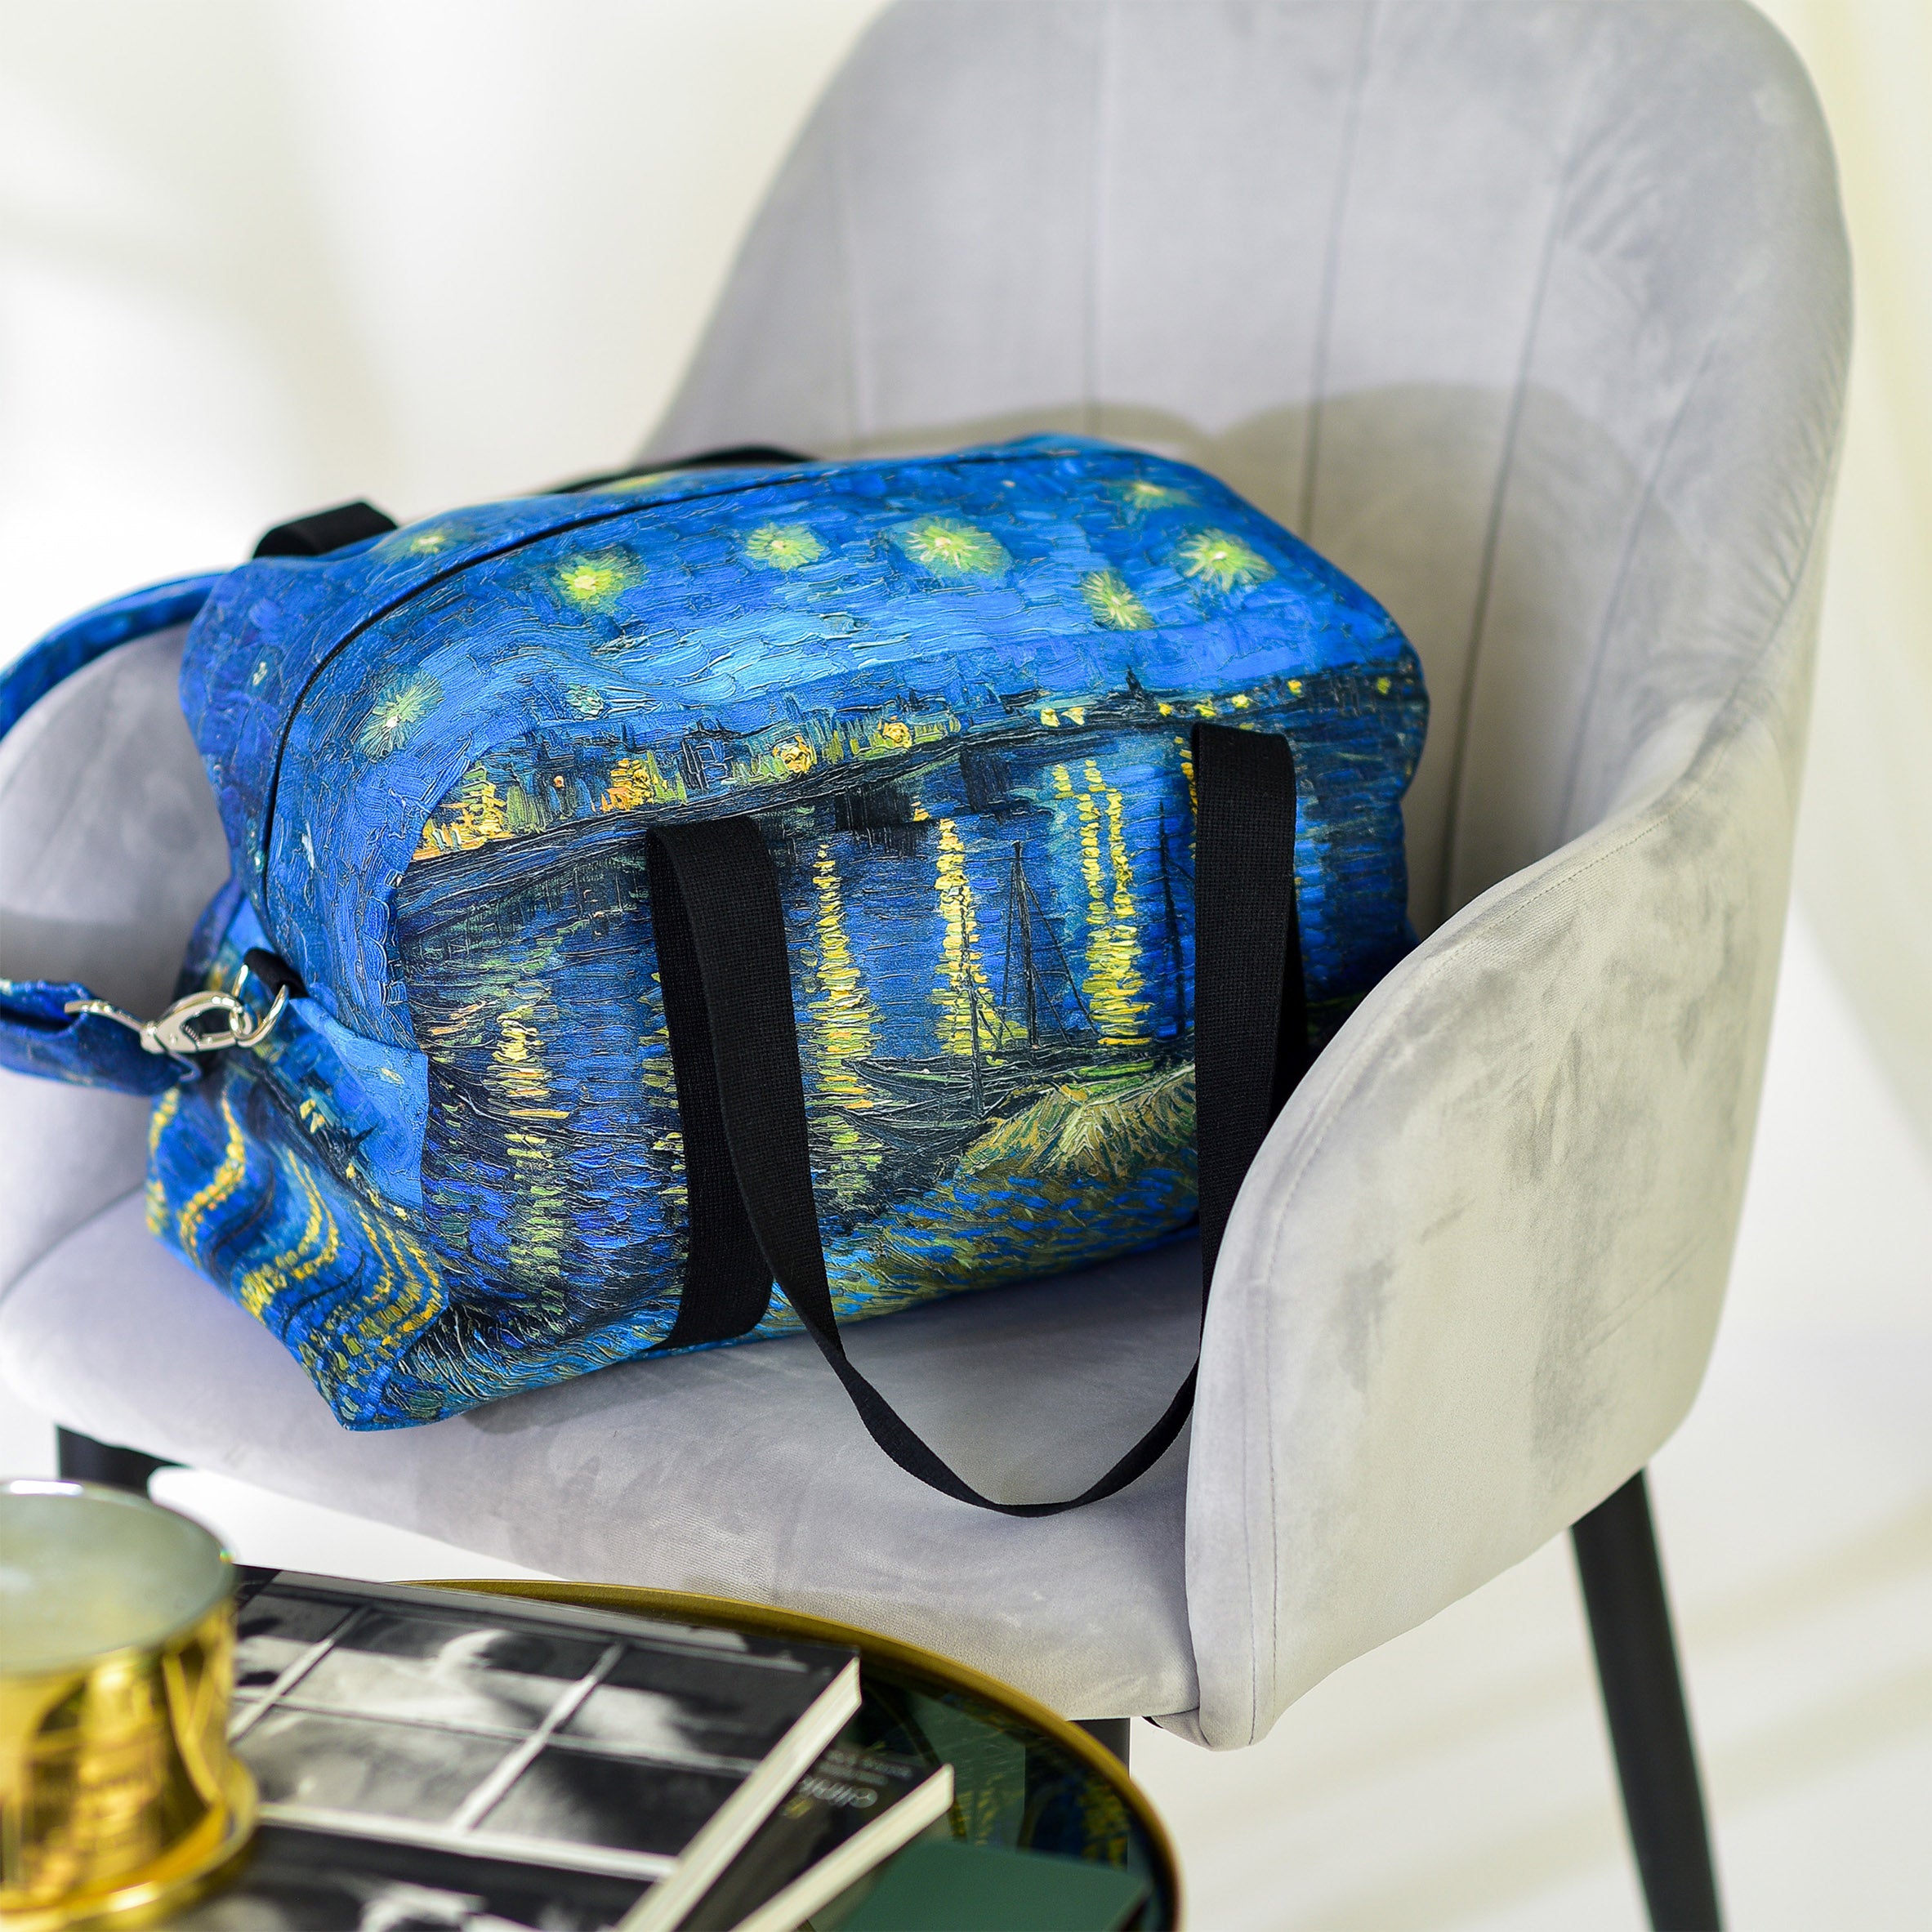 Travel / sports bag Vincent van Gogh "Starry Night Over the Rhone"